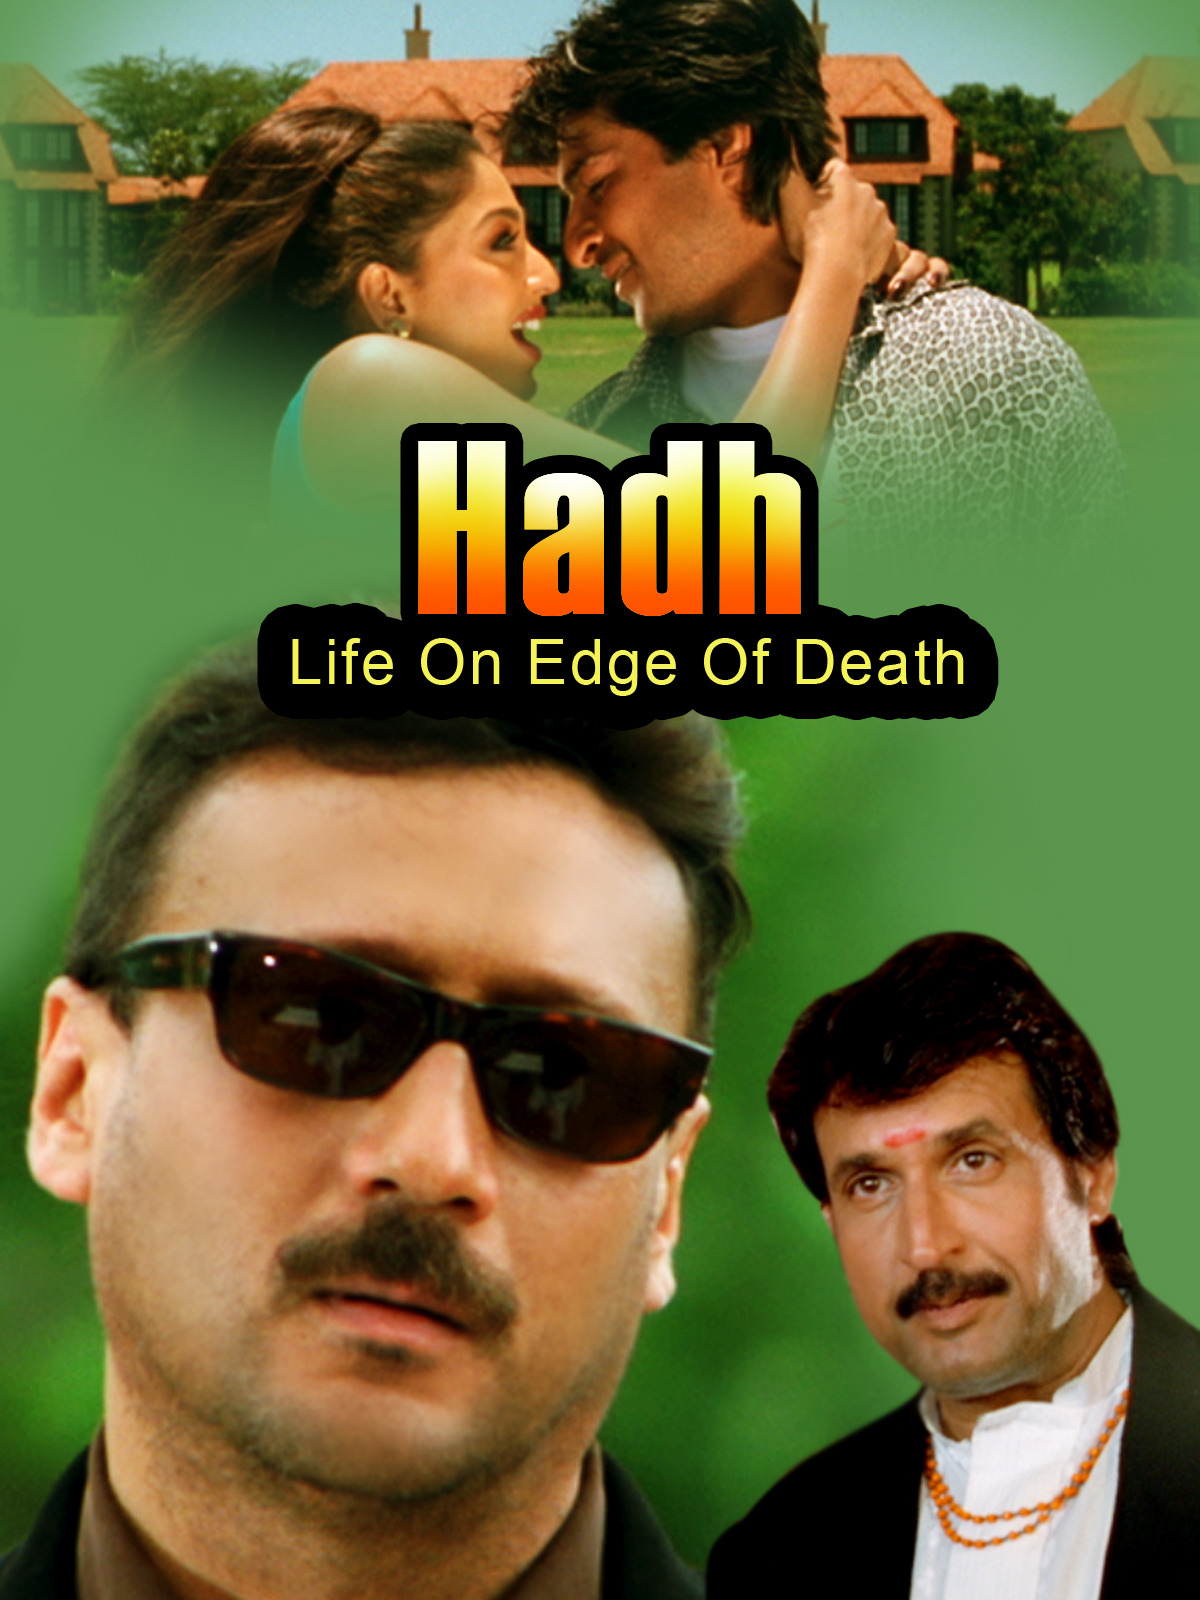 Hadh Life On The Edge Of Death Movie Review Release Date Songs